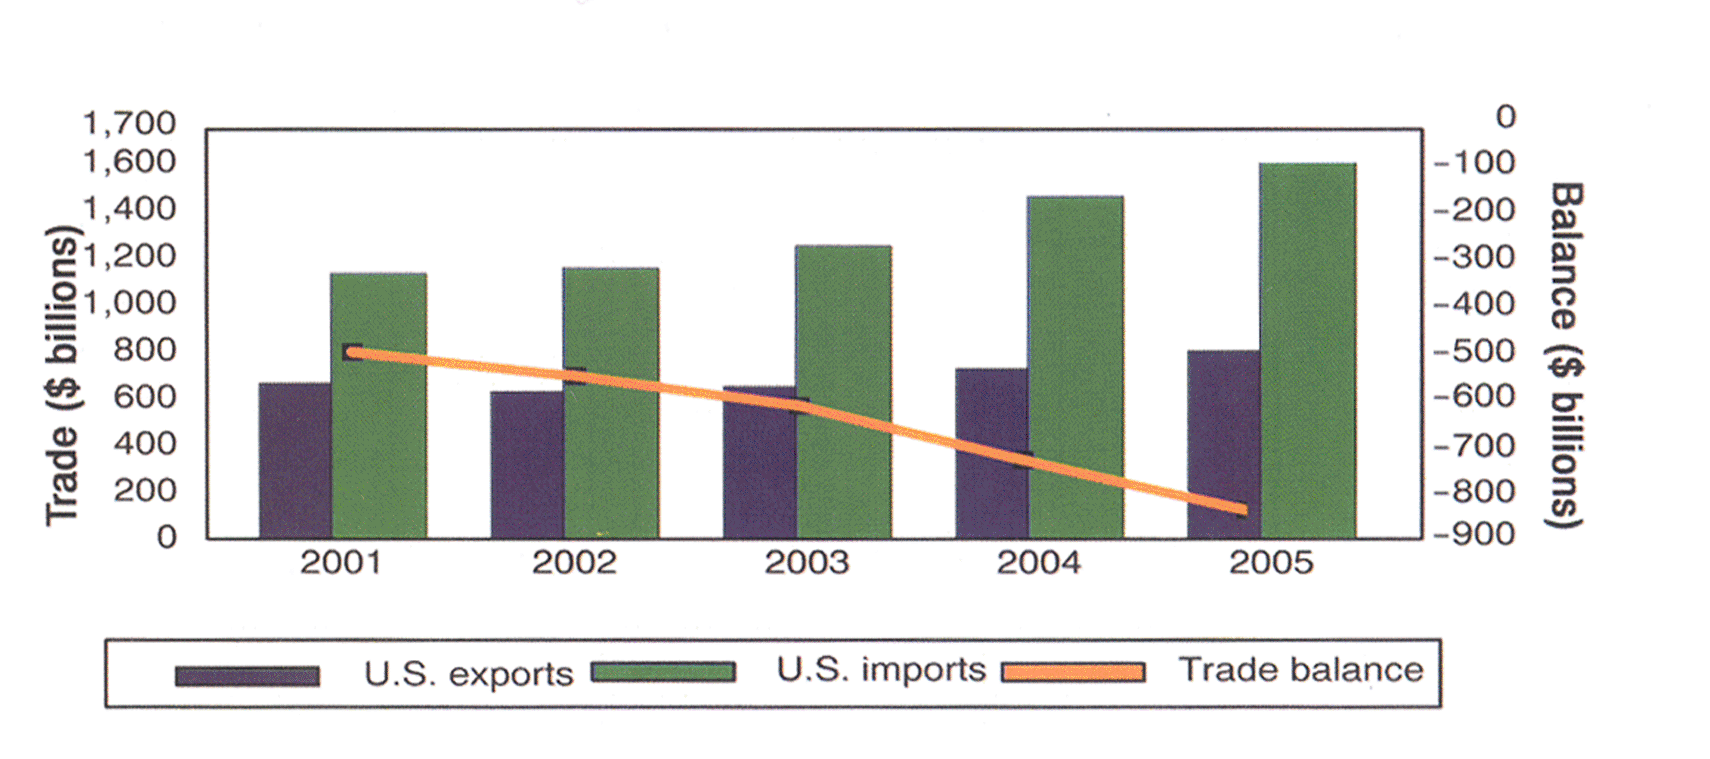 Exports, Imports, and Trade Balance for U.S. Trade Overview